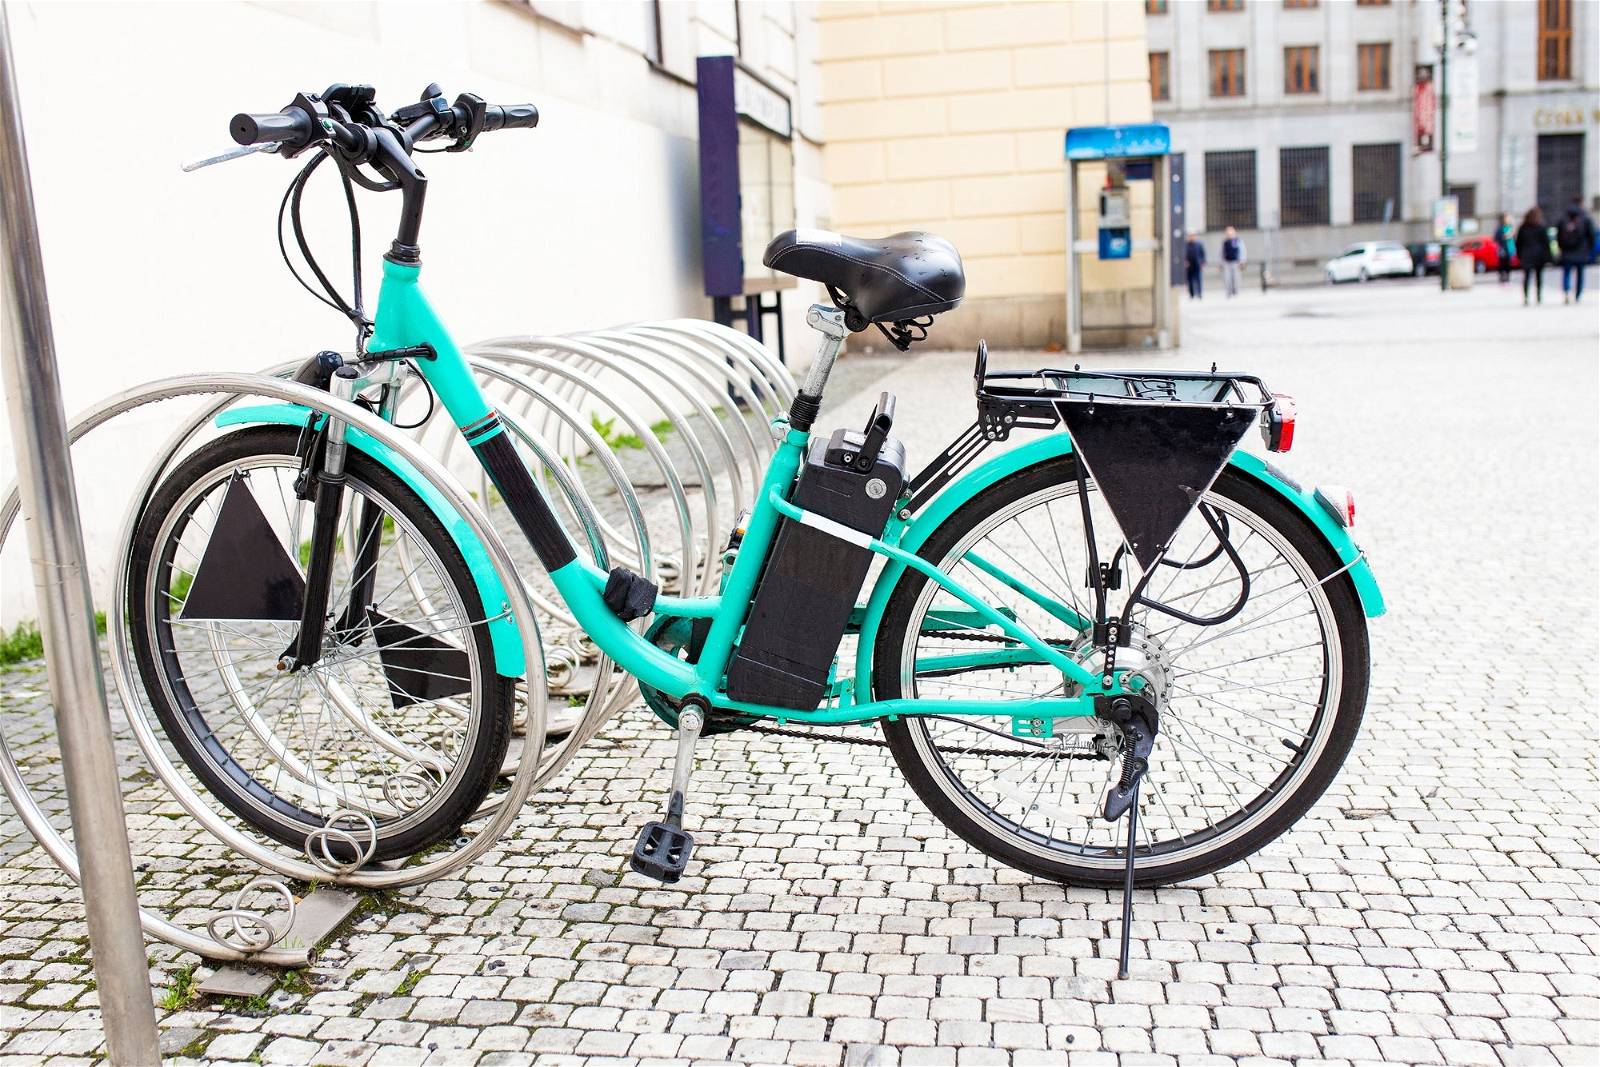 How to Protect Your Electric Bike in the Cities